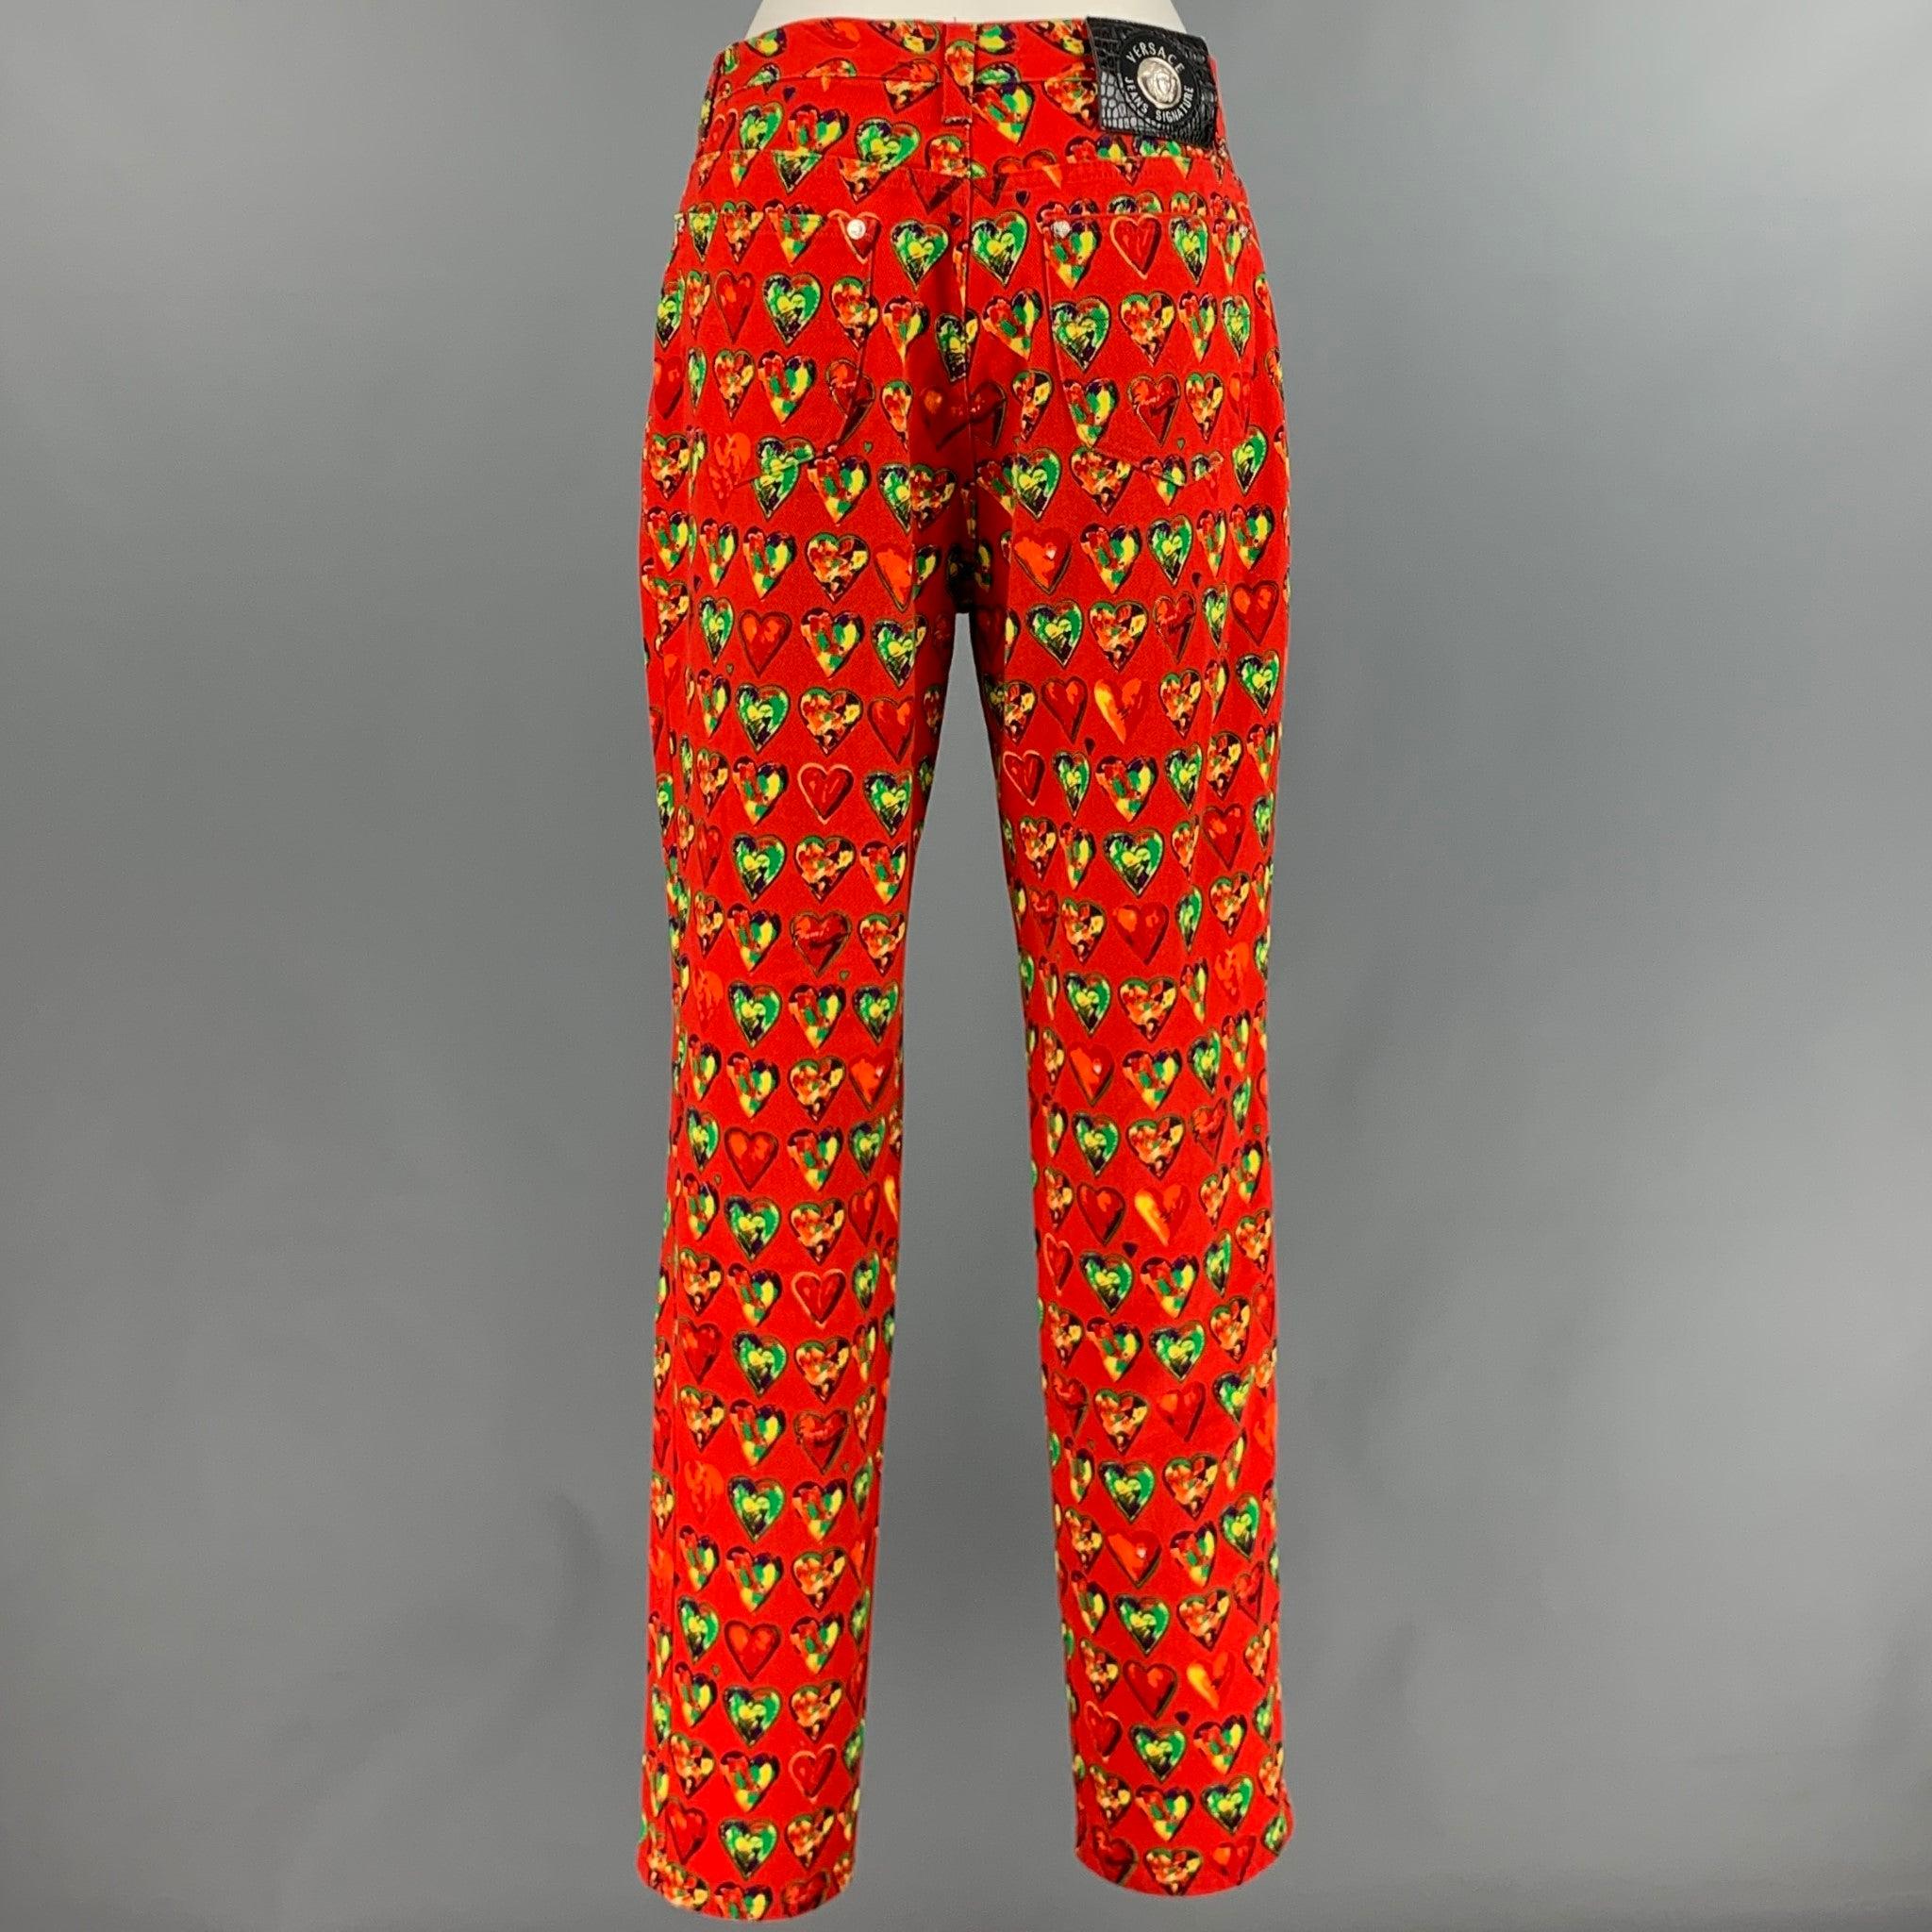 VERSACE JEANS COUTURE casual pants
in a red cotton fabric featuring a jean cut style, green and yellow hearts pattern, and a zip fly closure. Made in Italy.Excellent Pre-Owned Condition. 

Marked:   32/46 

Measurements: 
  Waist: 32 inches Rise: 10